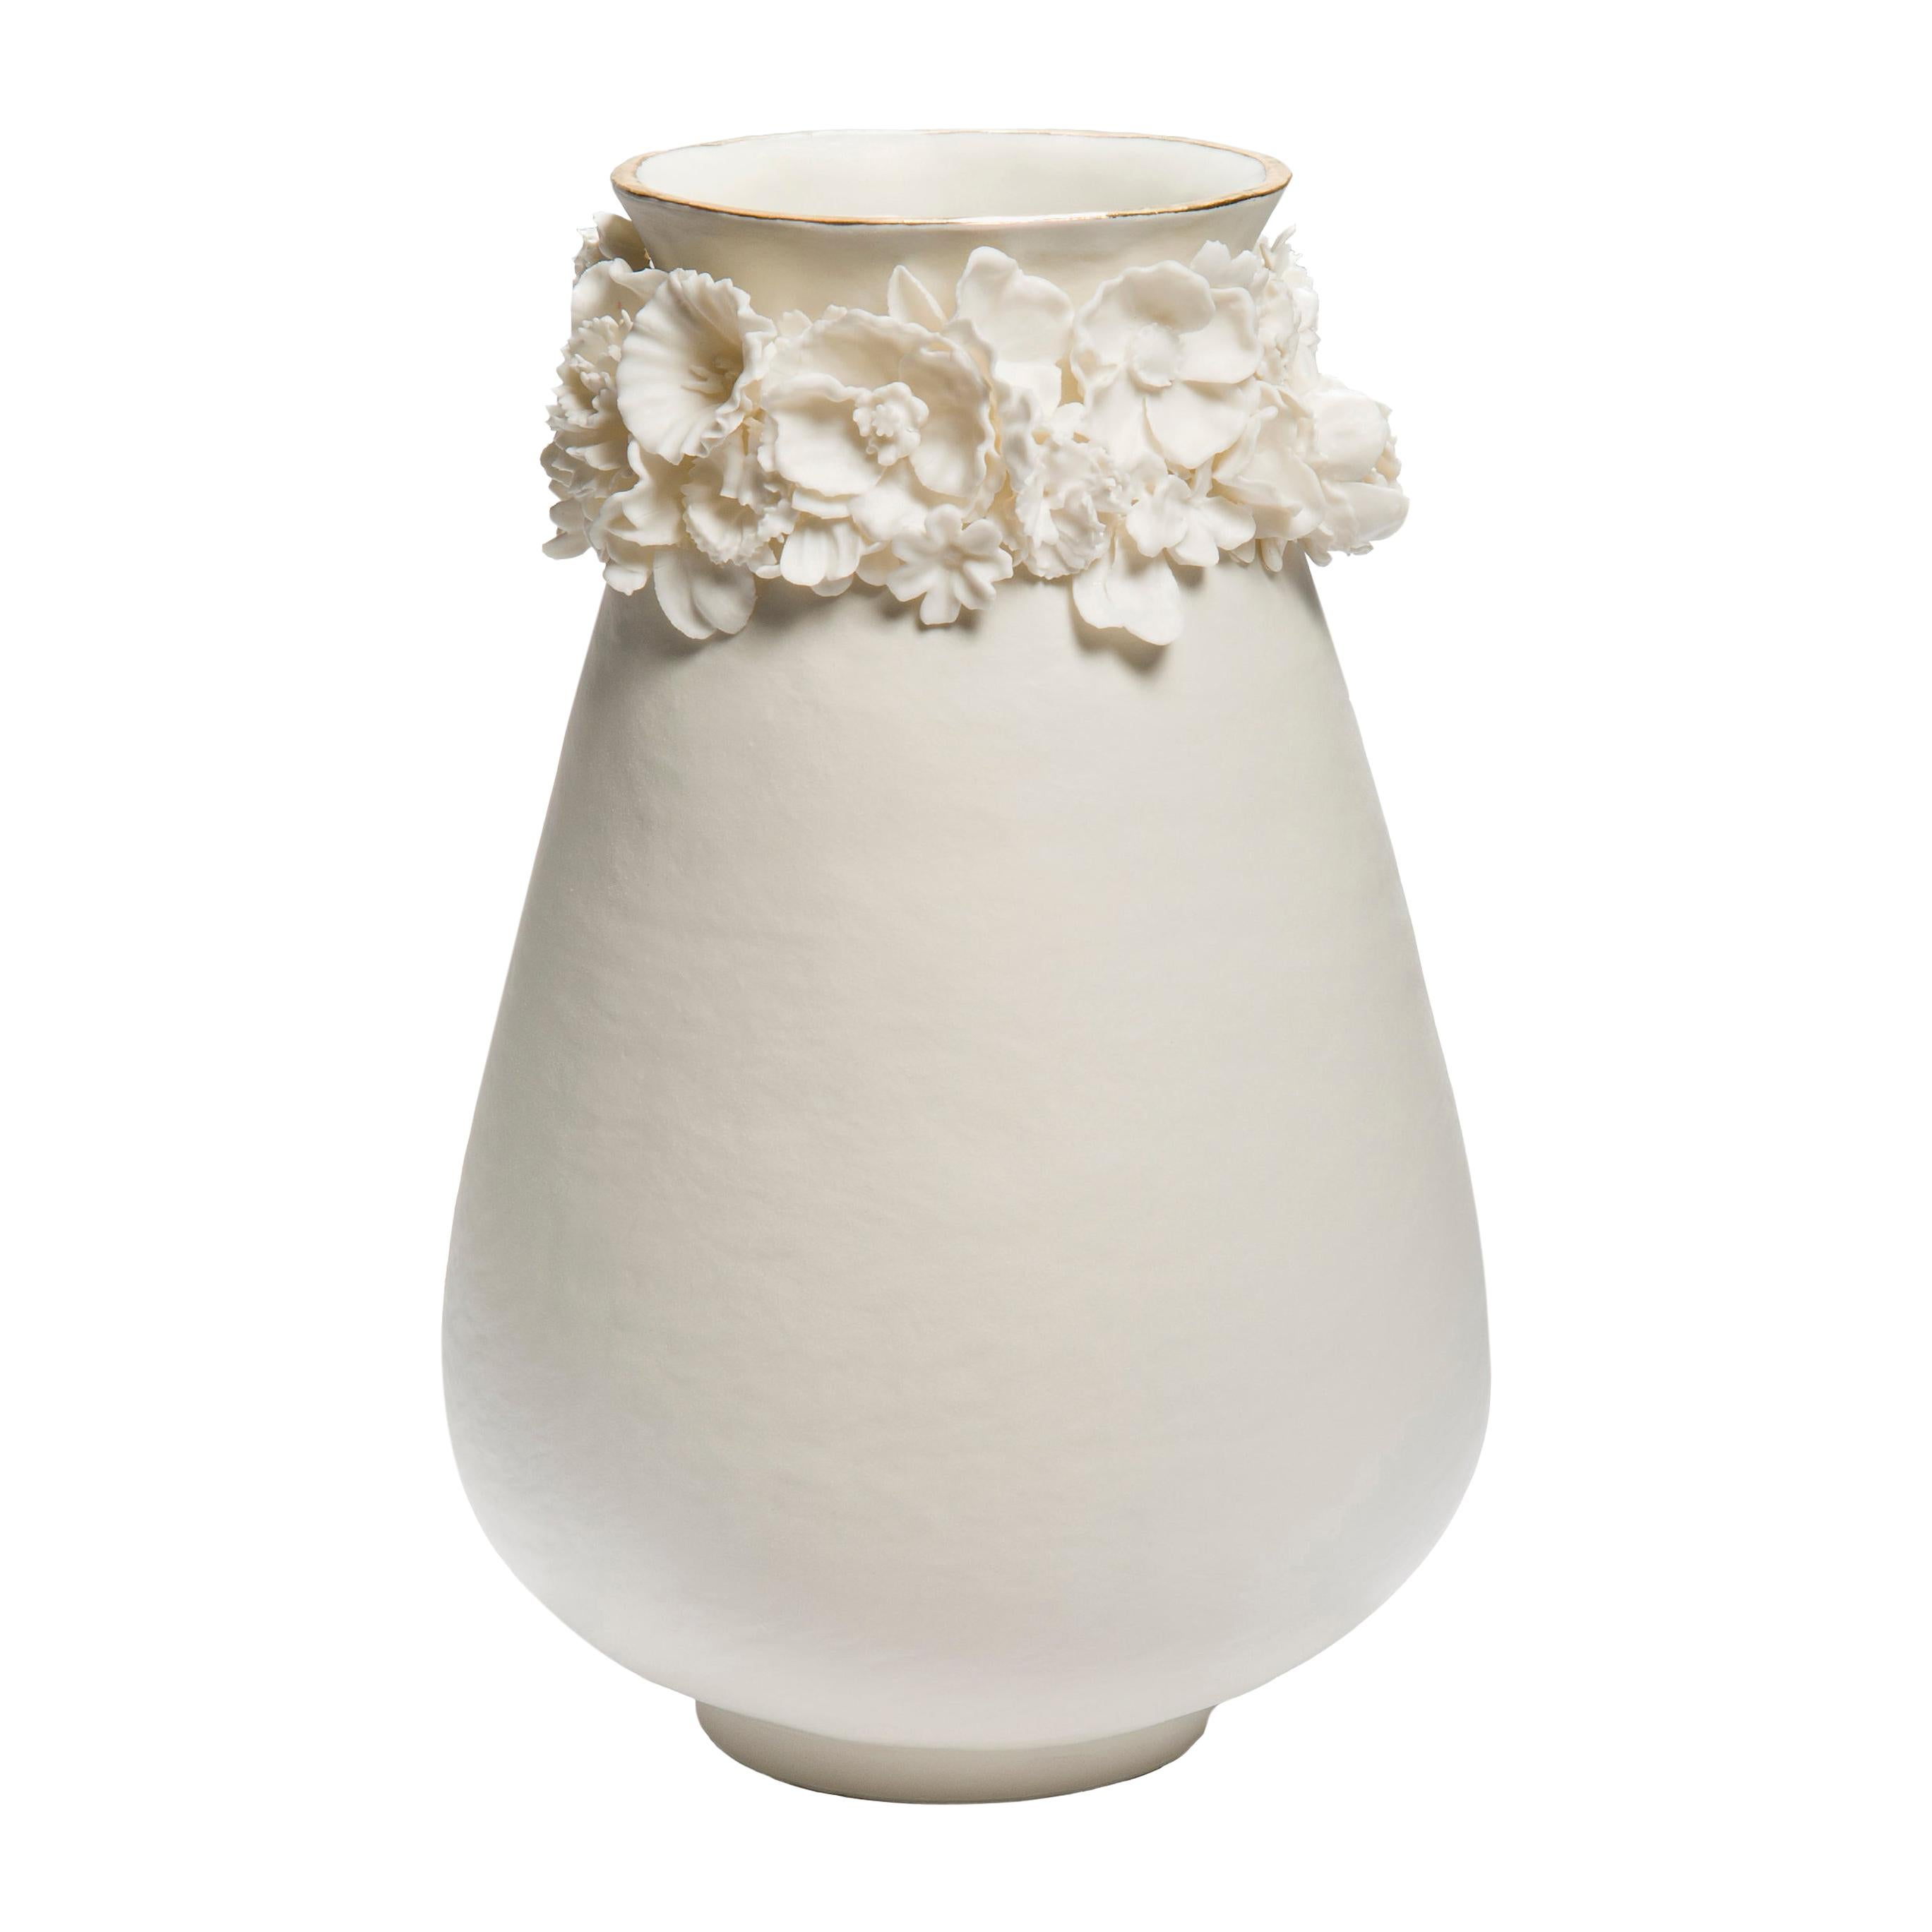 Forget Me Not Tall Vase in Porcelain and Gold, Floral Artwork by Amy Hughes